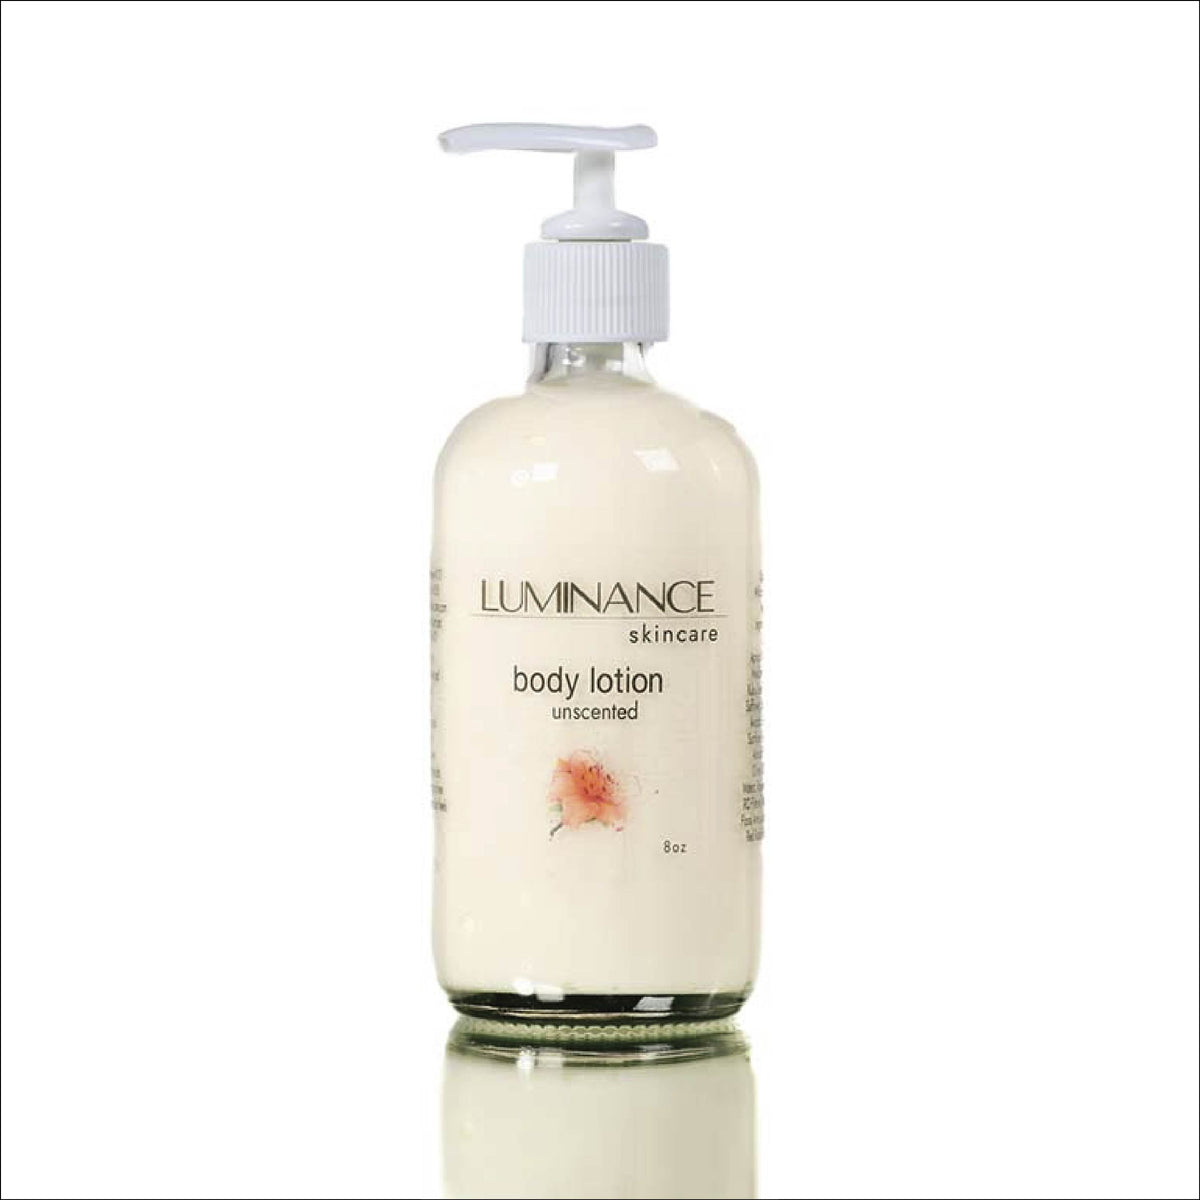 Luminance Skincare Body Lotion 8 Ounce Bottle Unscented